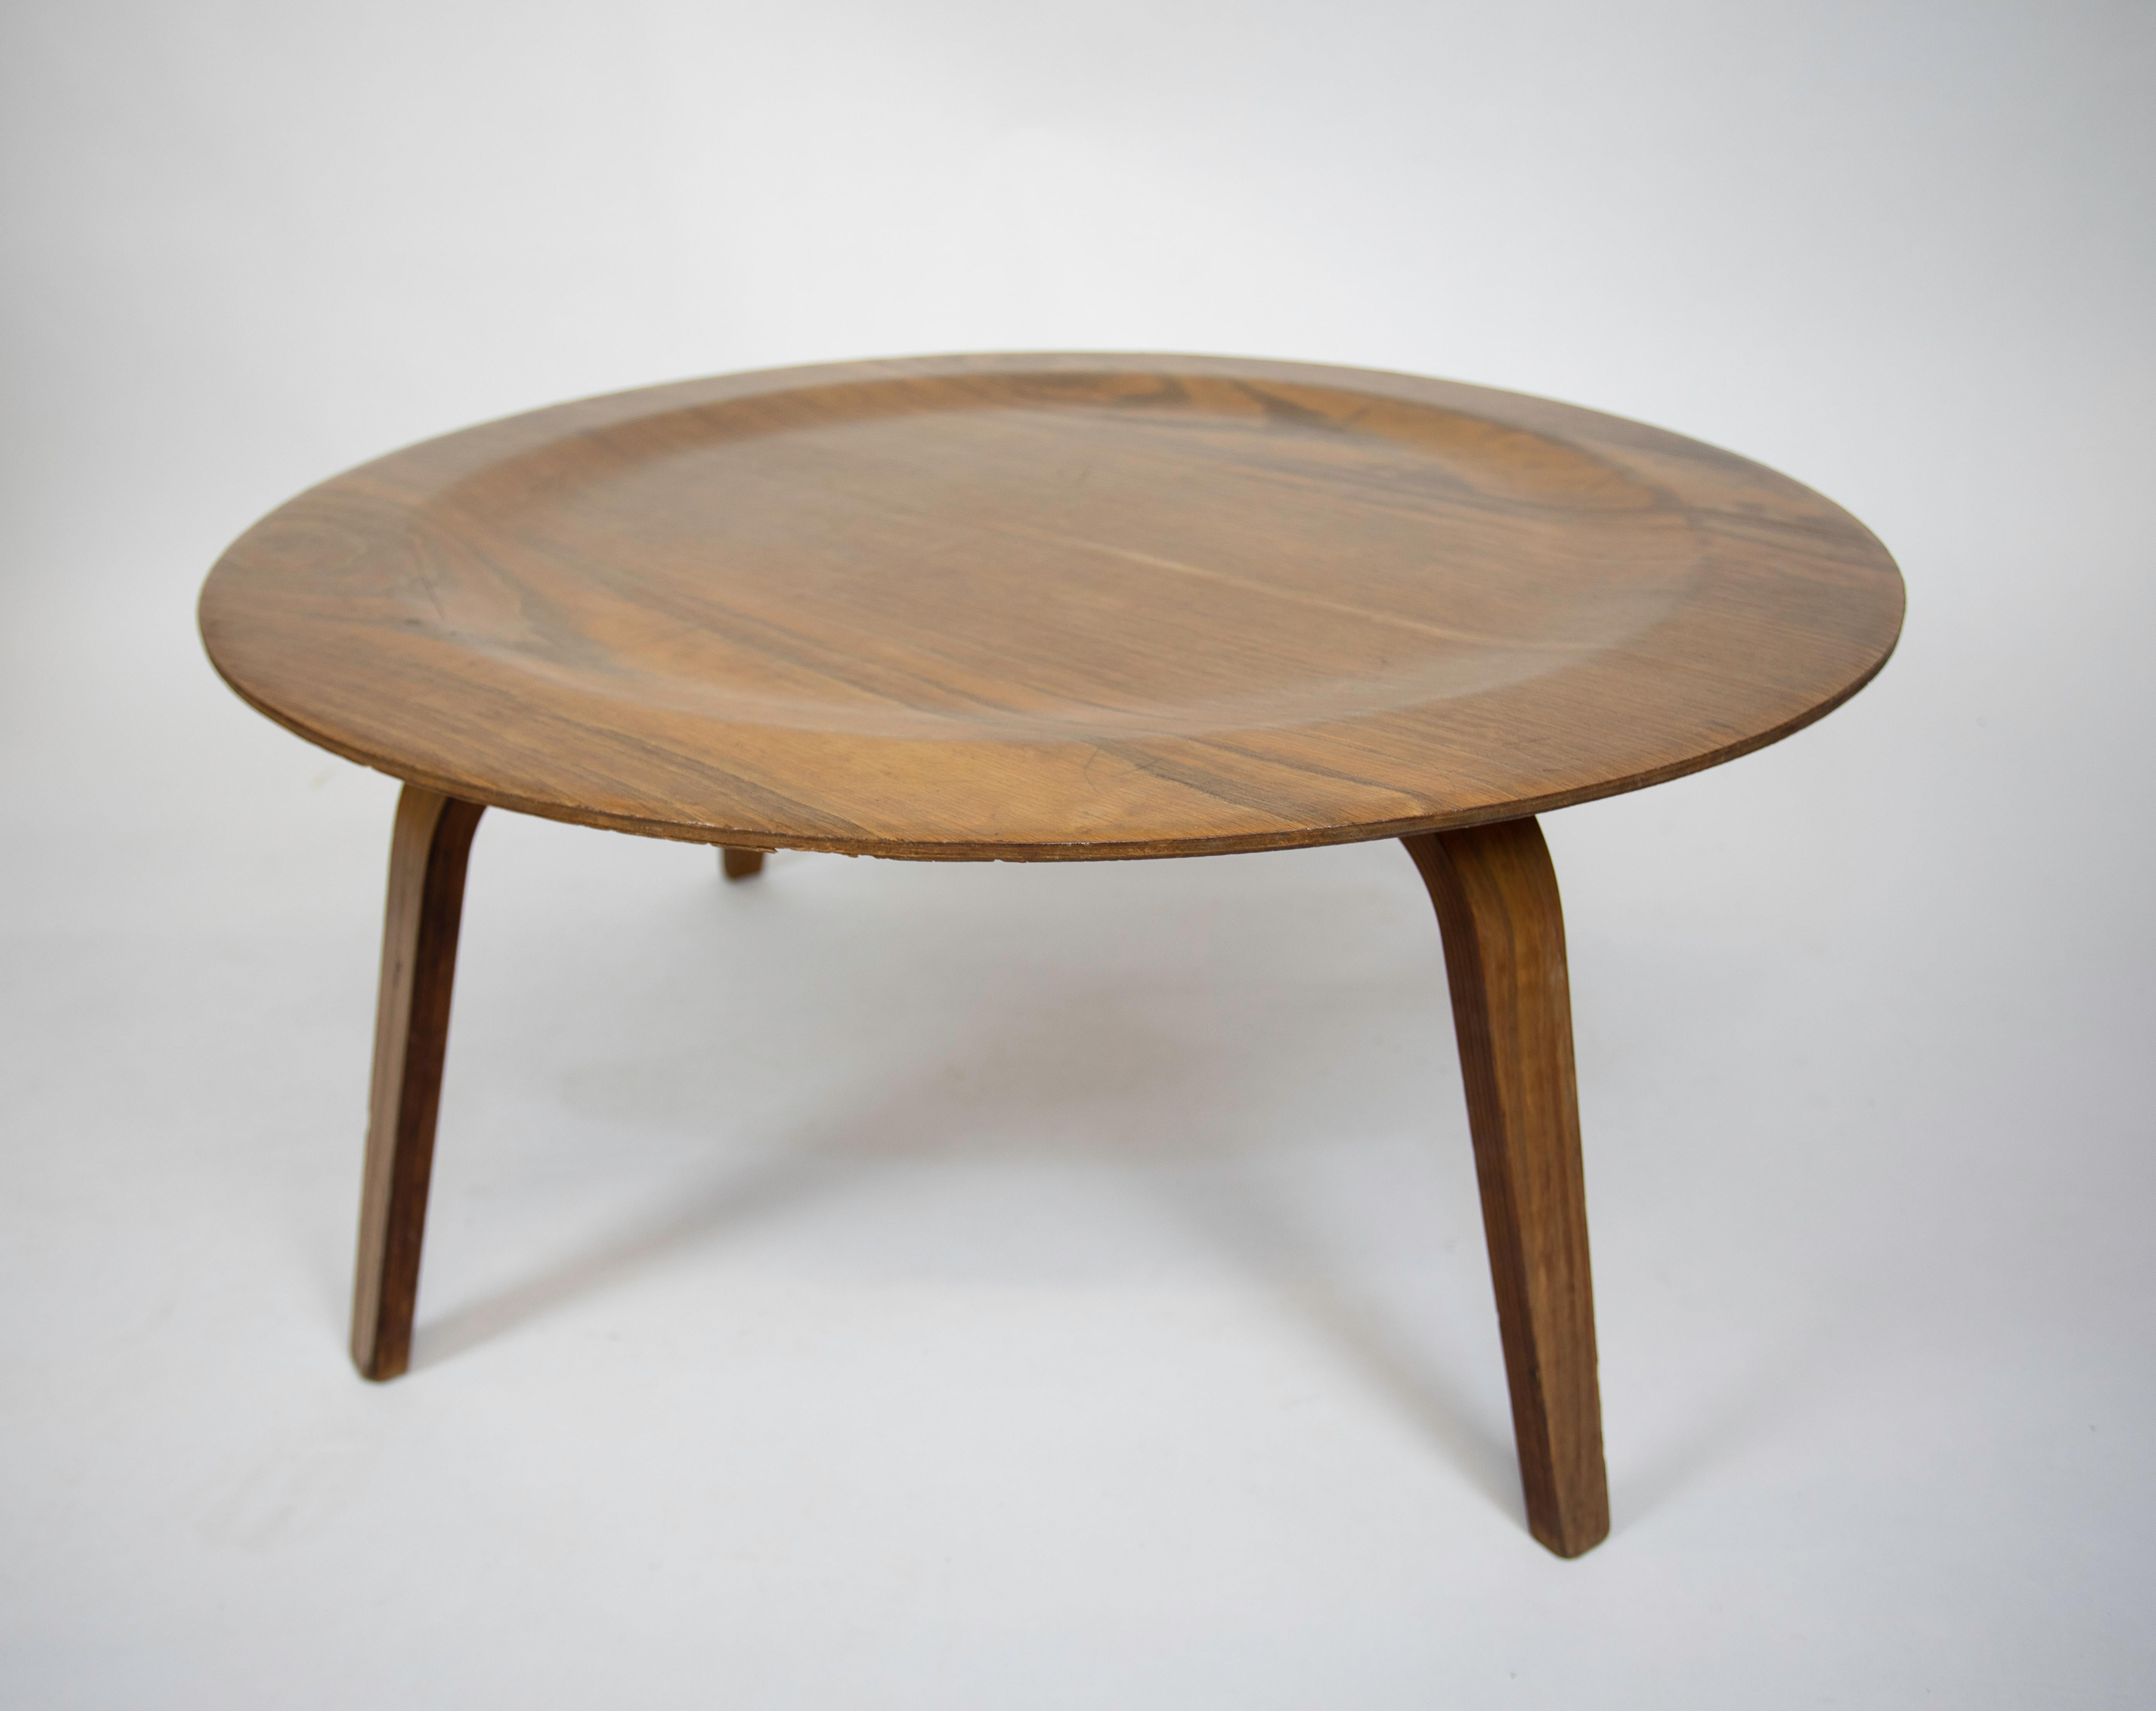 Charles and Ray Eames CTW-3
Molded Birch Plywood
Manufactured by Evans Products.